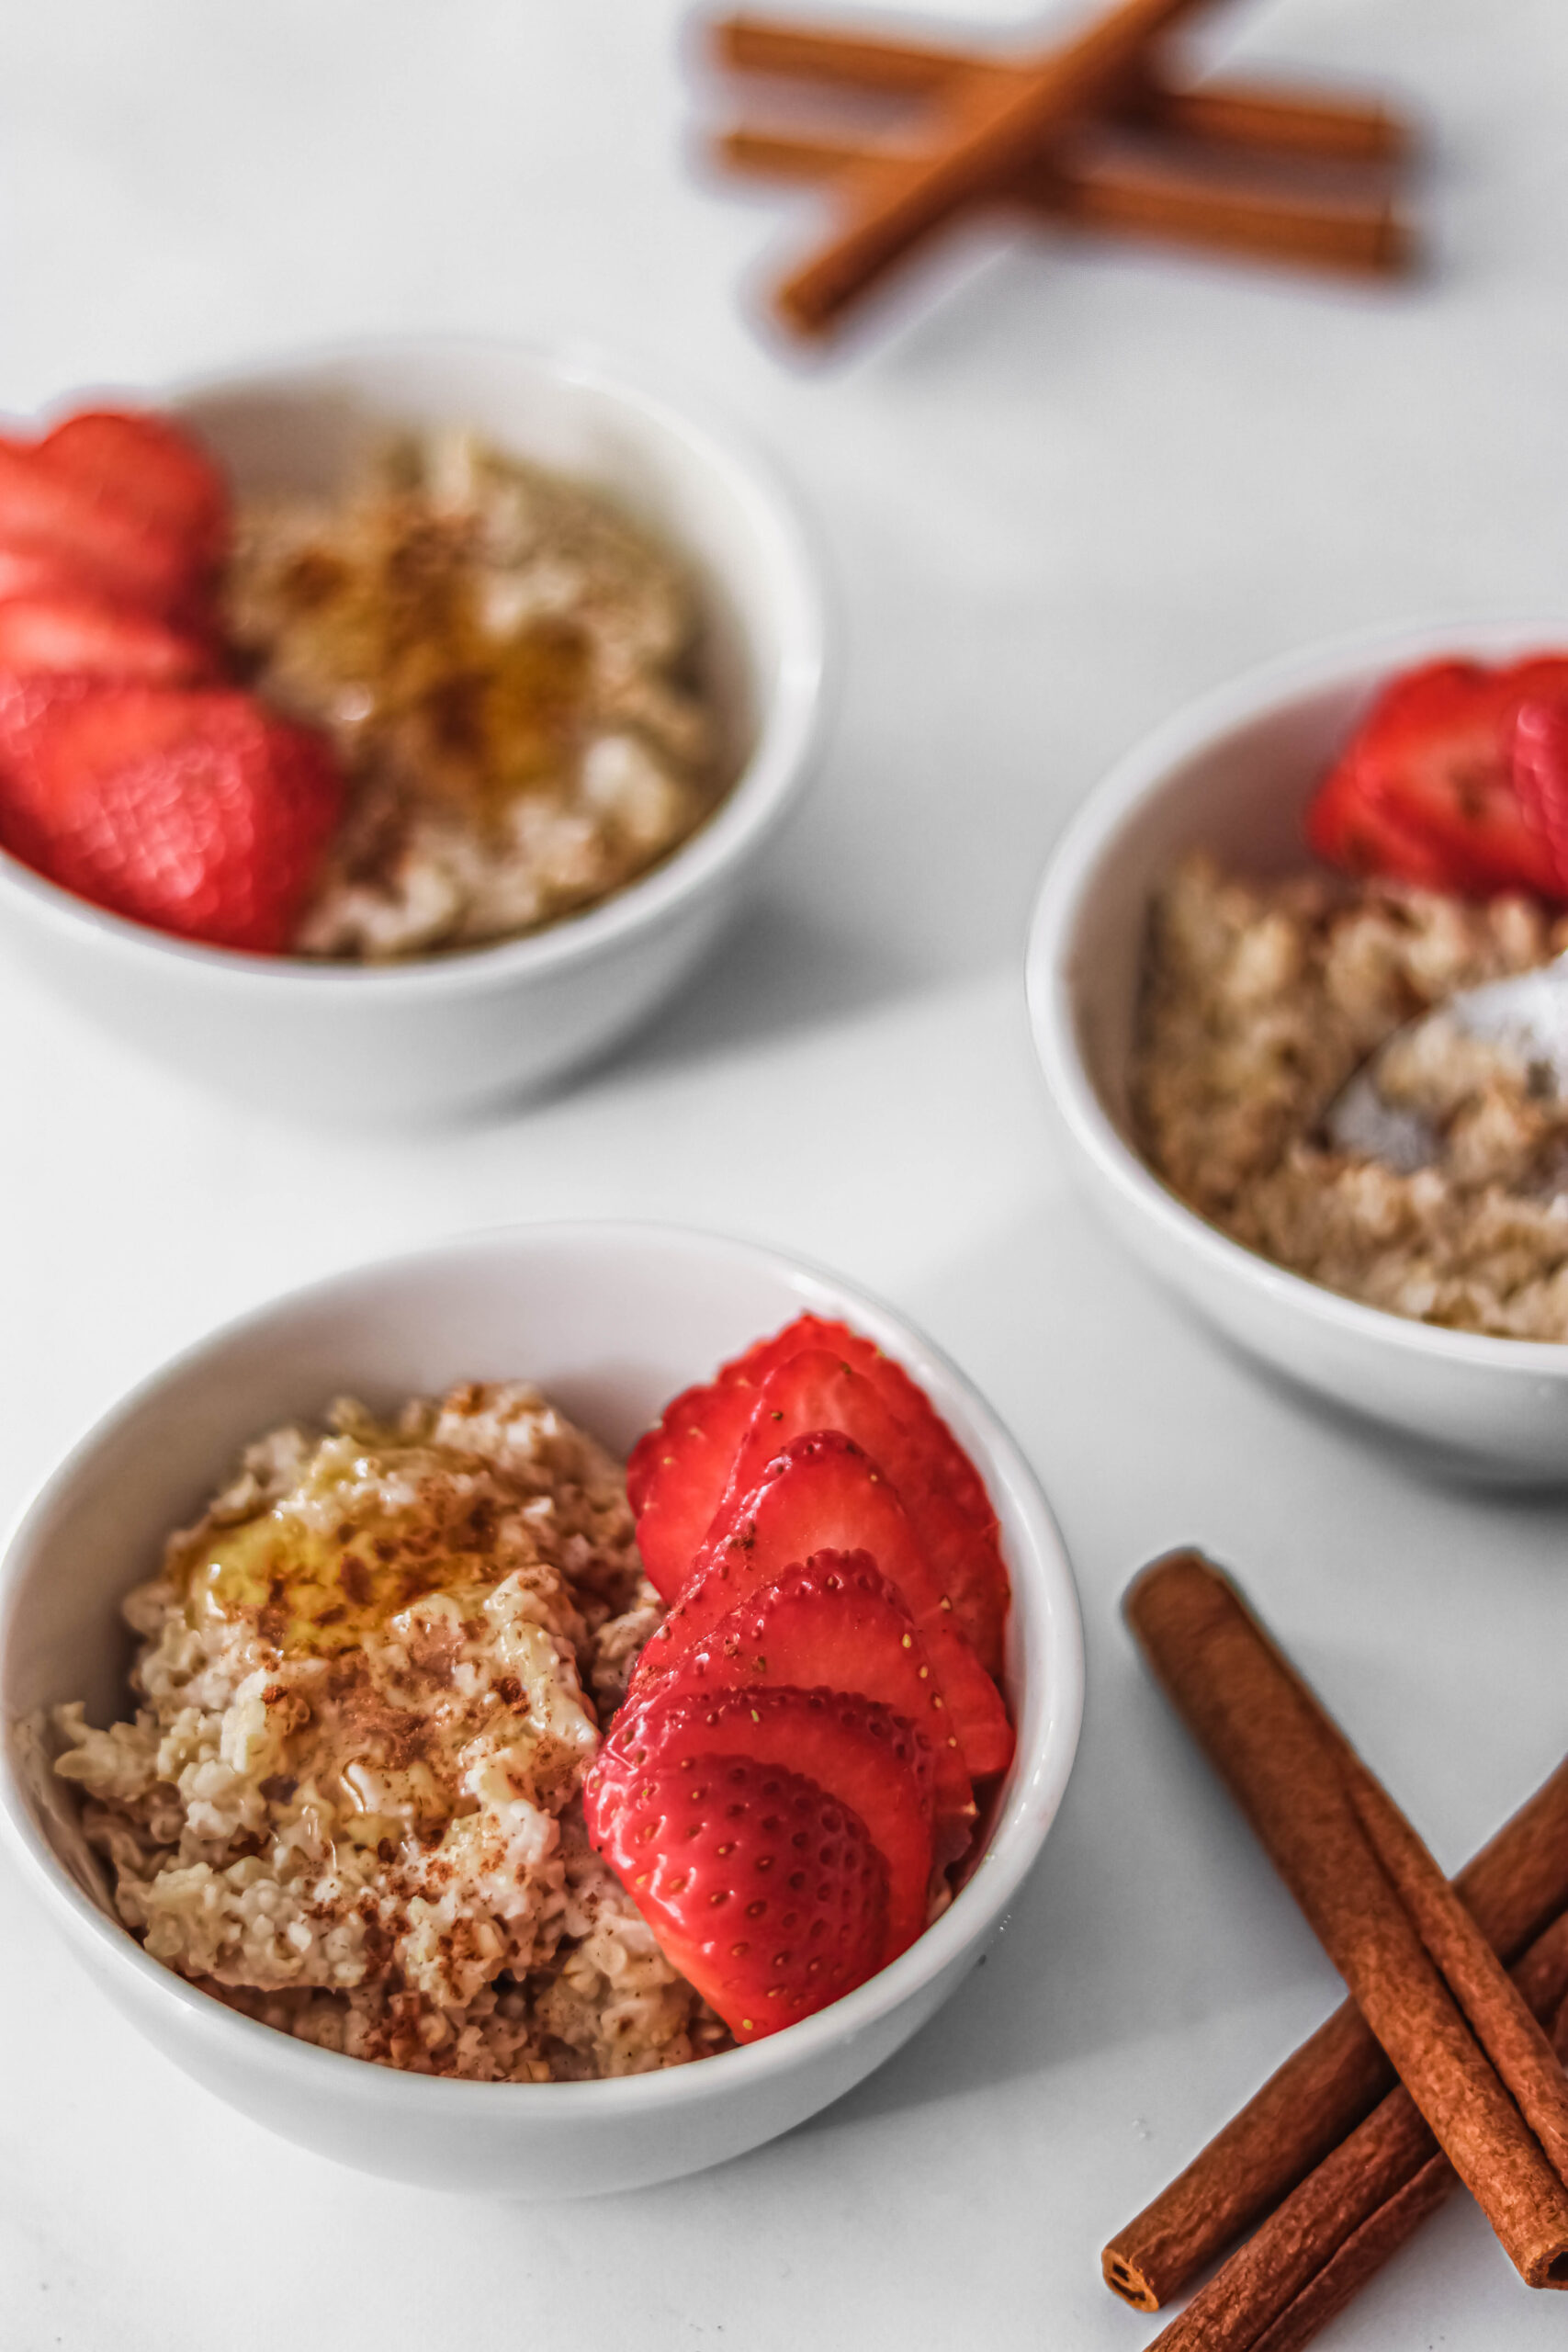 Three bowls of creamy egg white oats with freshly sliced strawberries, drizzled with honey. Full cinnamon sticks are on the side.